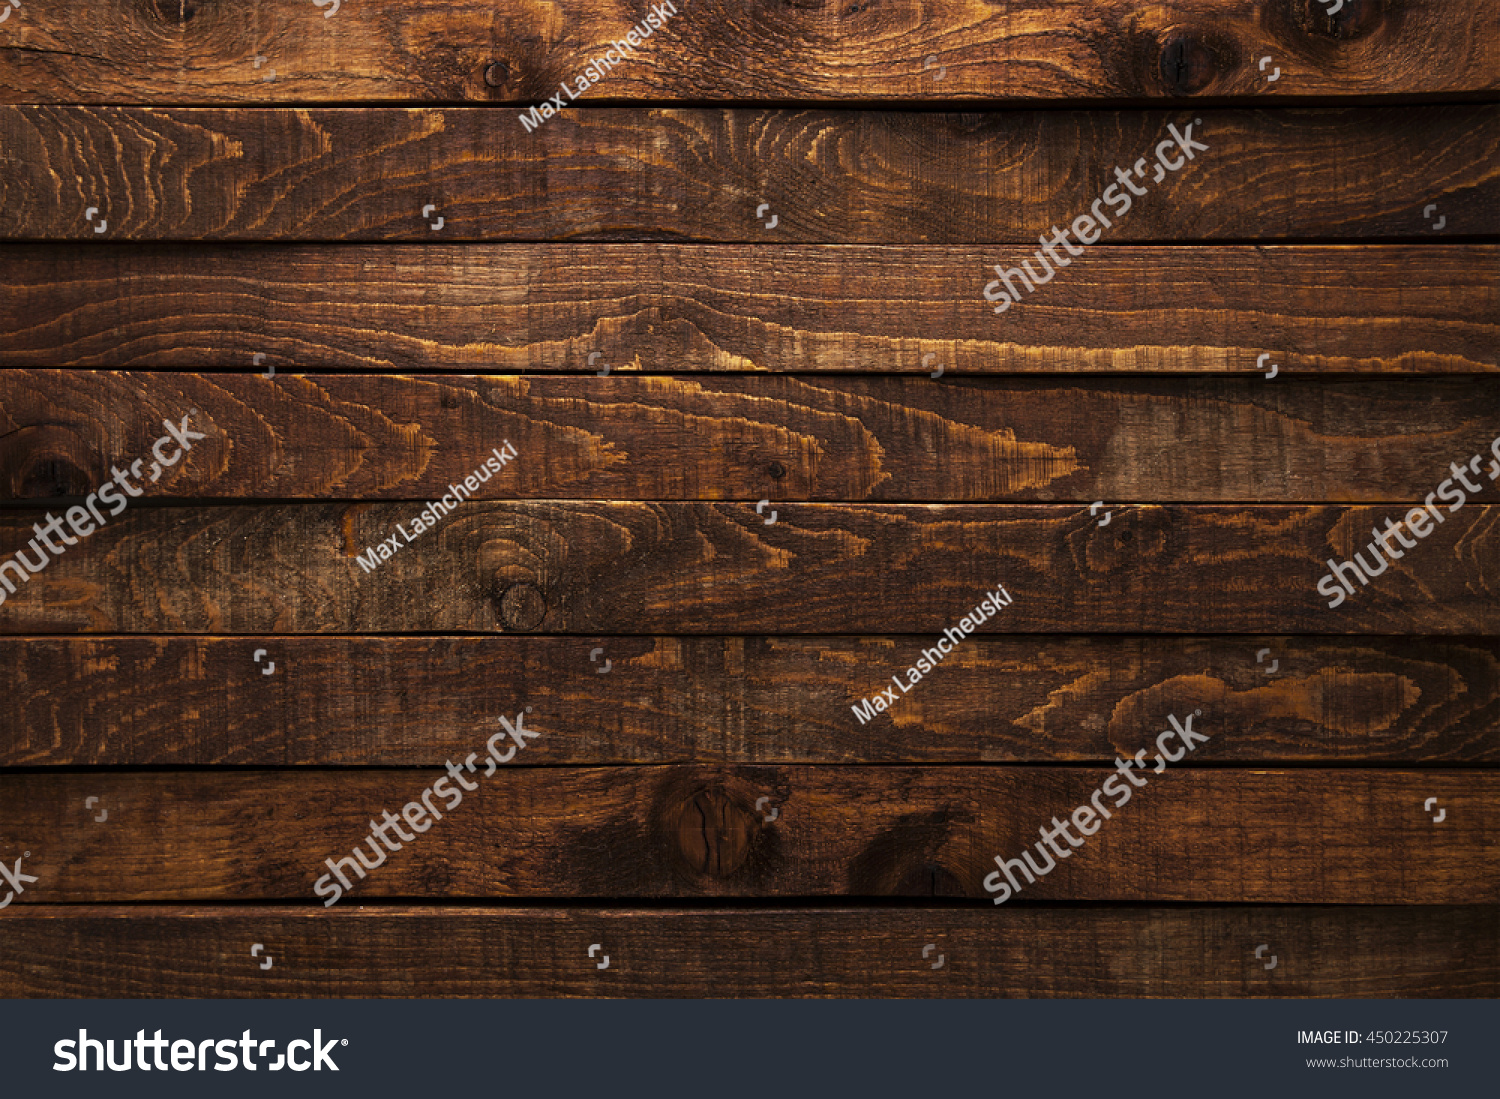 Wood background or texture #450225307